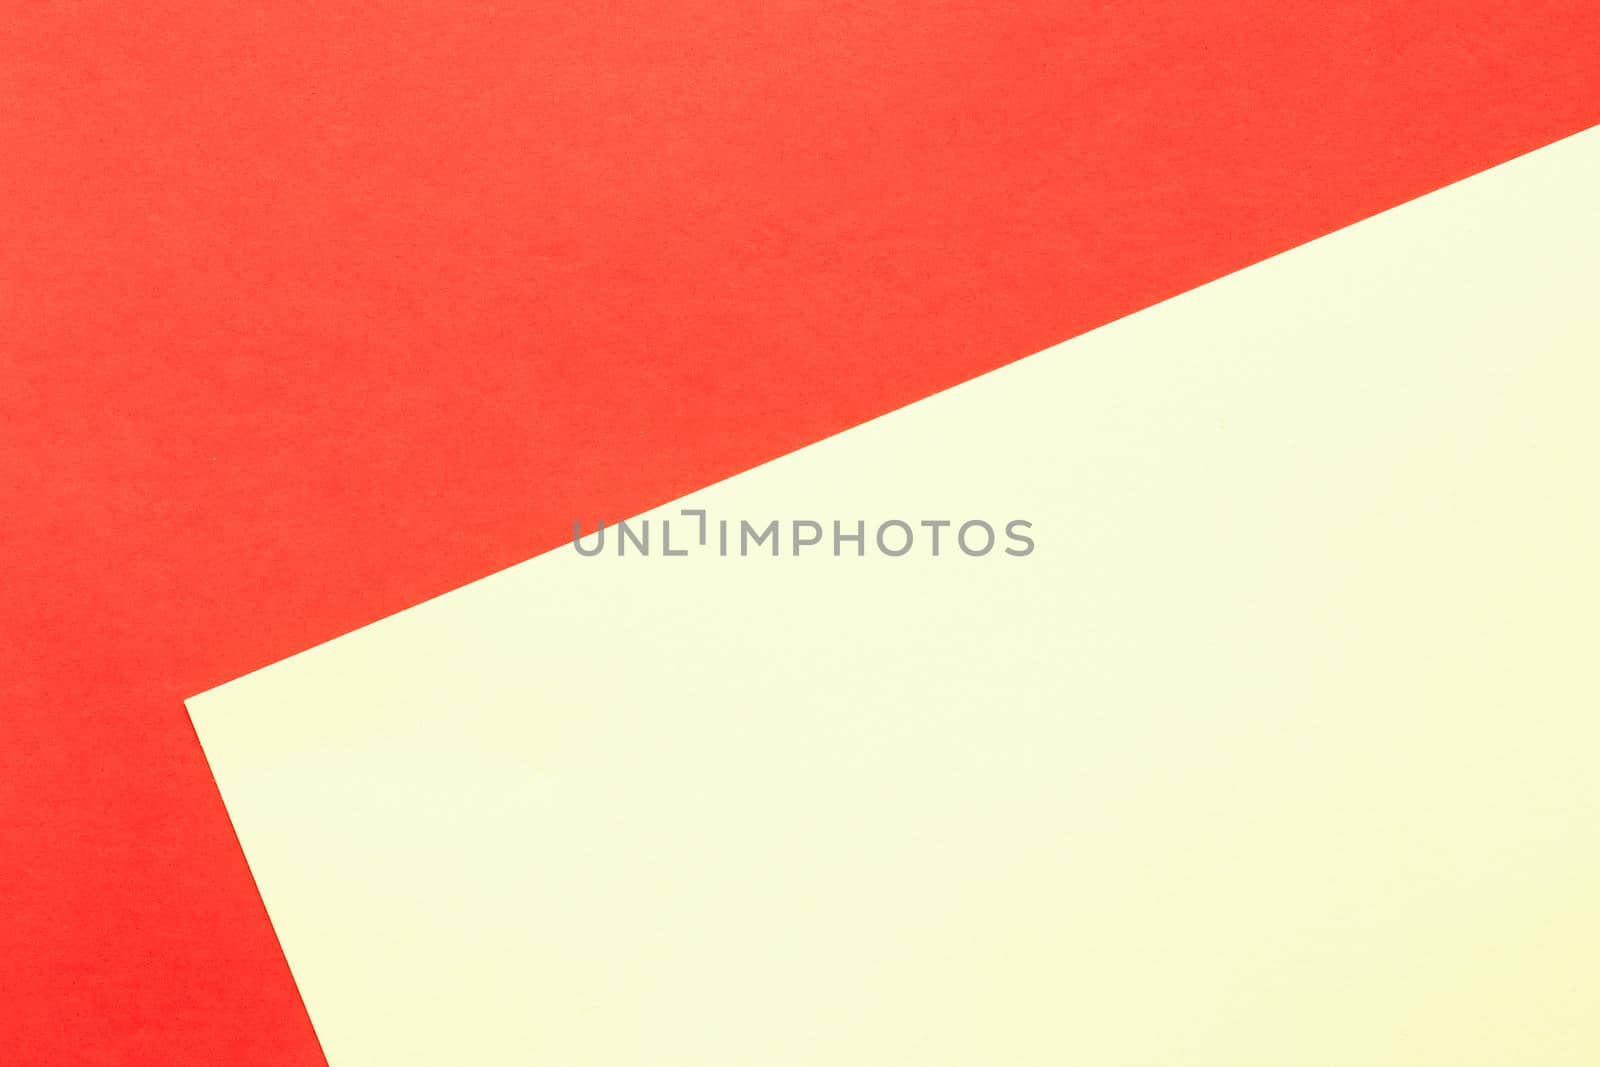 Blank paper texture as background. It's time to be creative